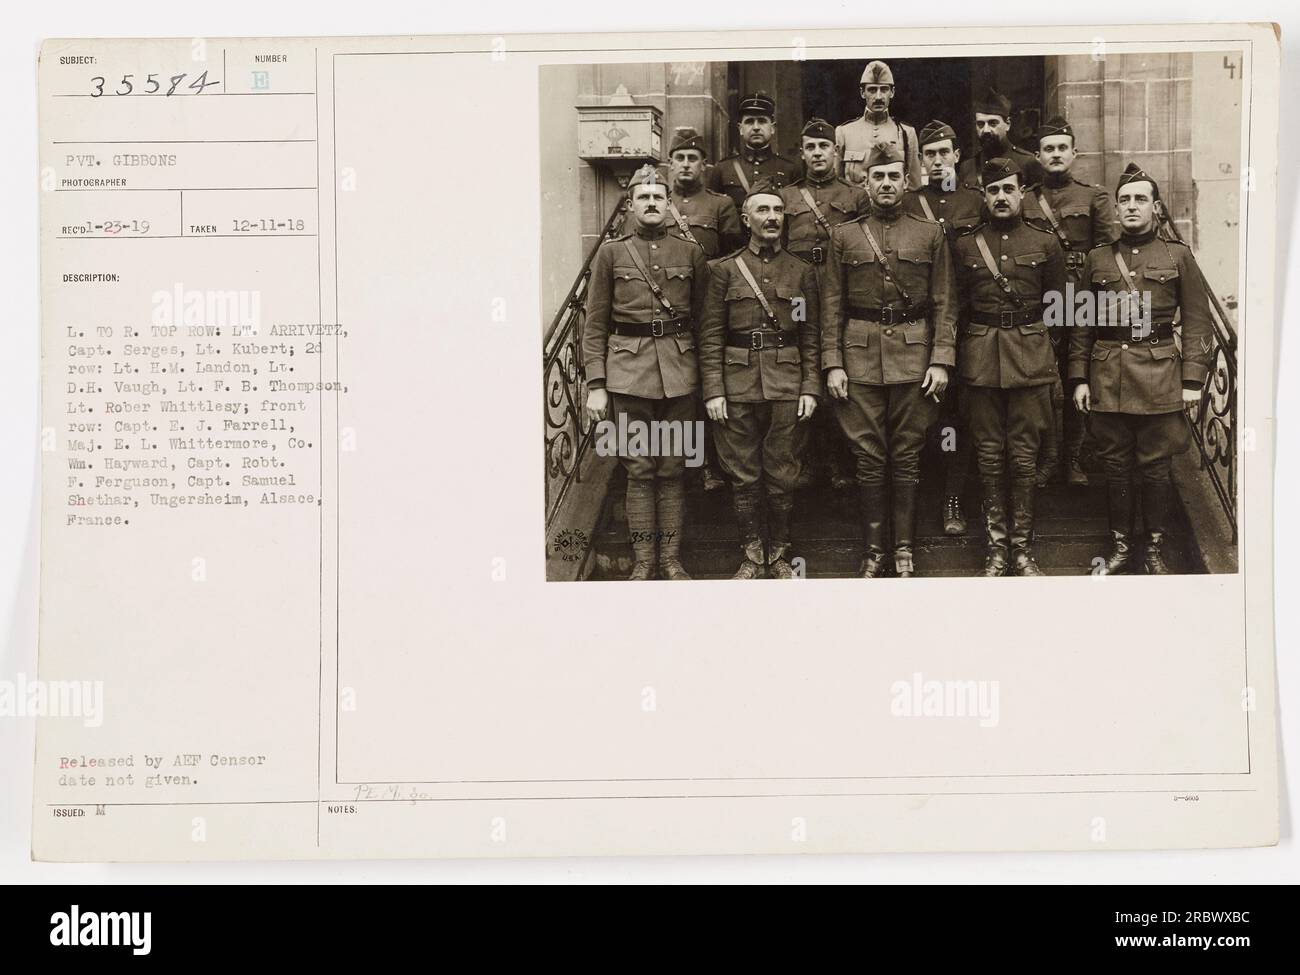 The photograph shows a group of military personnel in Ungersheim, Alsace, France during World War One. The individuals in the photo are identified as Lt. Arrivete, Capt. Serges, Lt. Kubert in the top row, Lt. H.M. Landon, Lt. D.H. Vaugh, Lt. F.B. Thompson, Lt. Robert Whittlesy in the 24th row, and Capt. E.J. Parrell, Maj. E.L. Whittermore, Co. Win. Hayward, Capt. Robt. F. Ferguson, Capt. Samuel Shethar in the front row. The specific date of the photo is not provided. Stock Photo